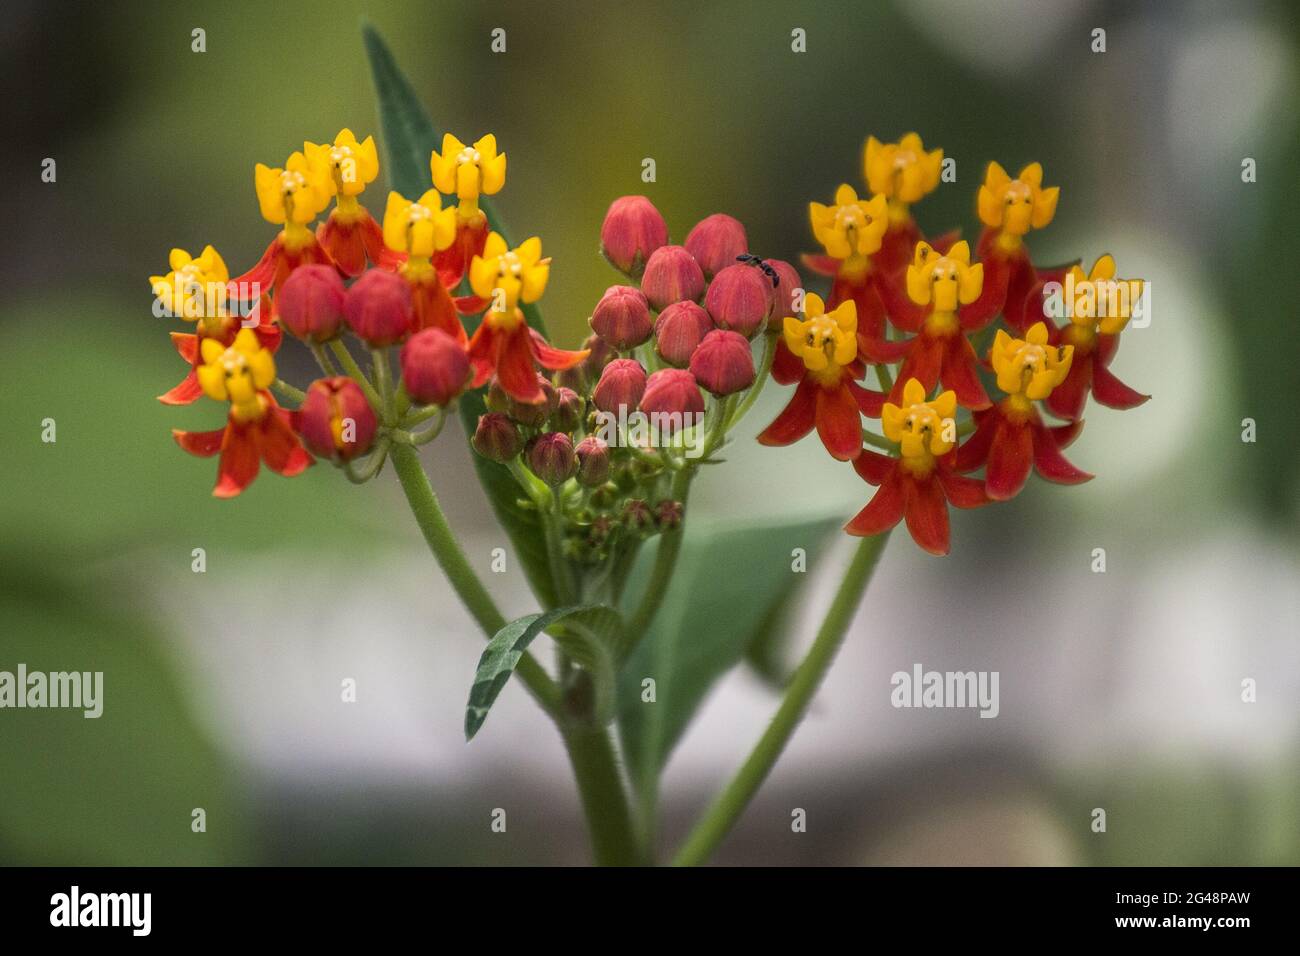 Soft focus of Mexican butterfly weed flowers blooming at a garden Stock Photo